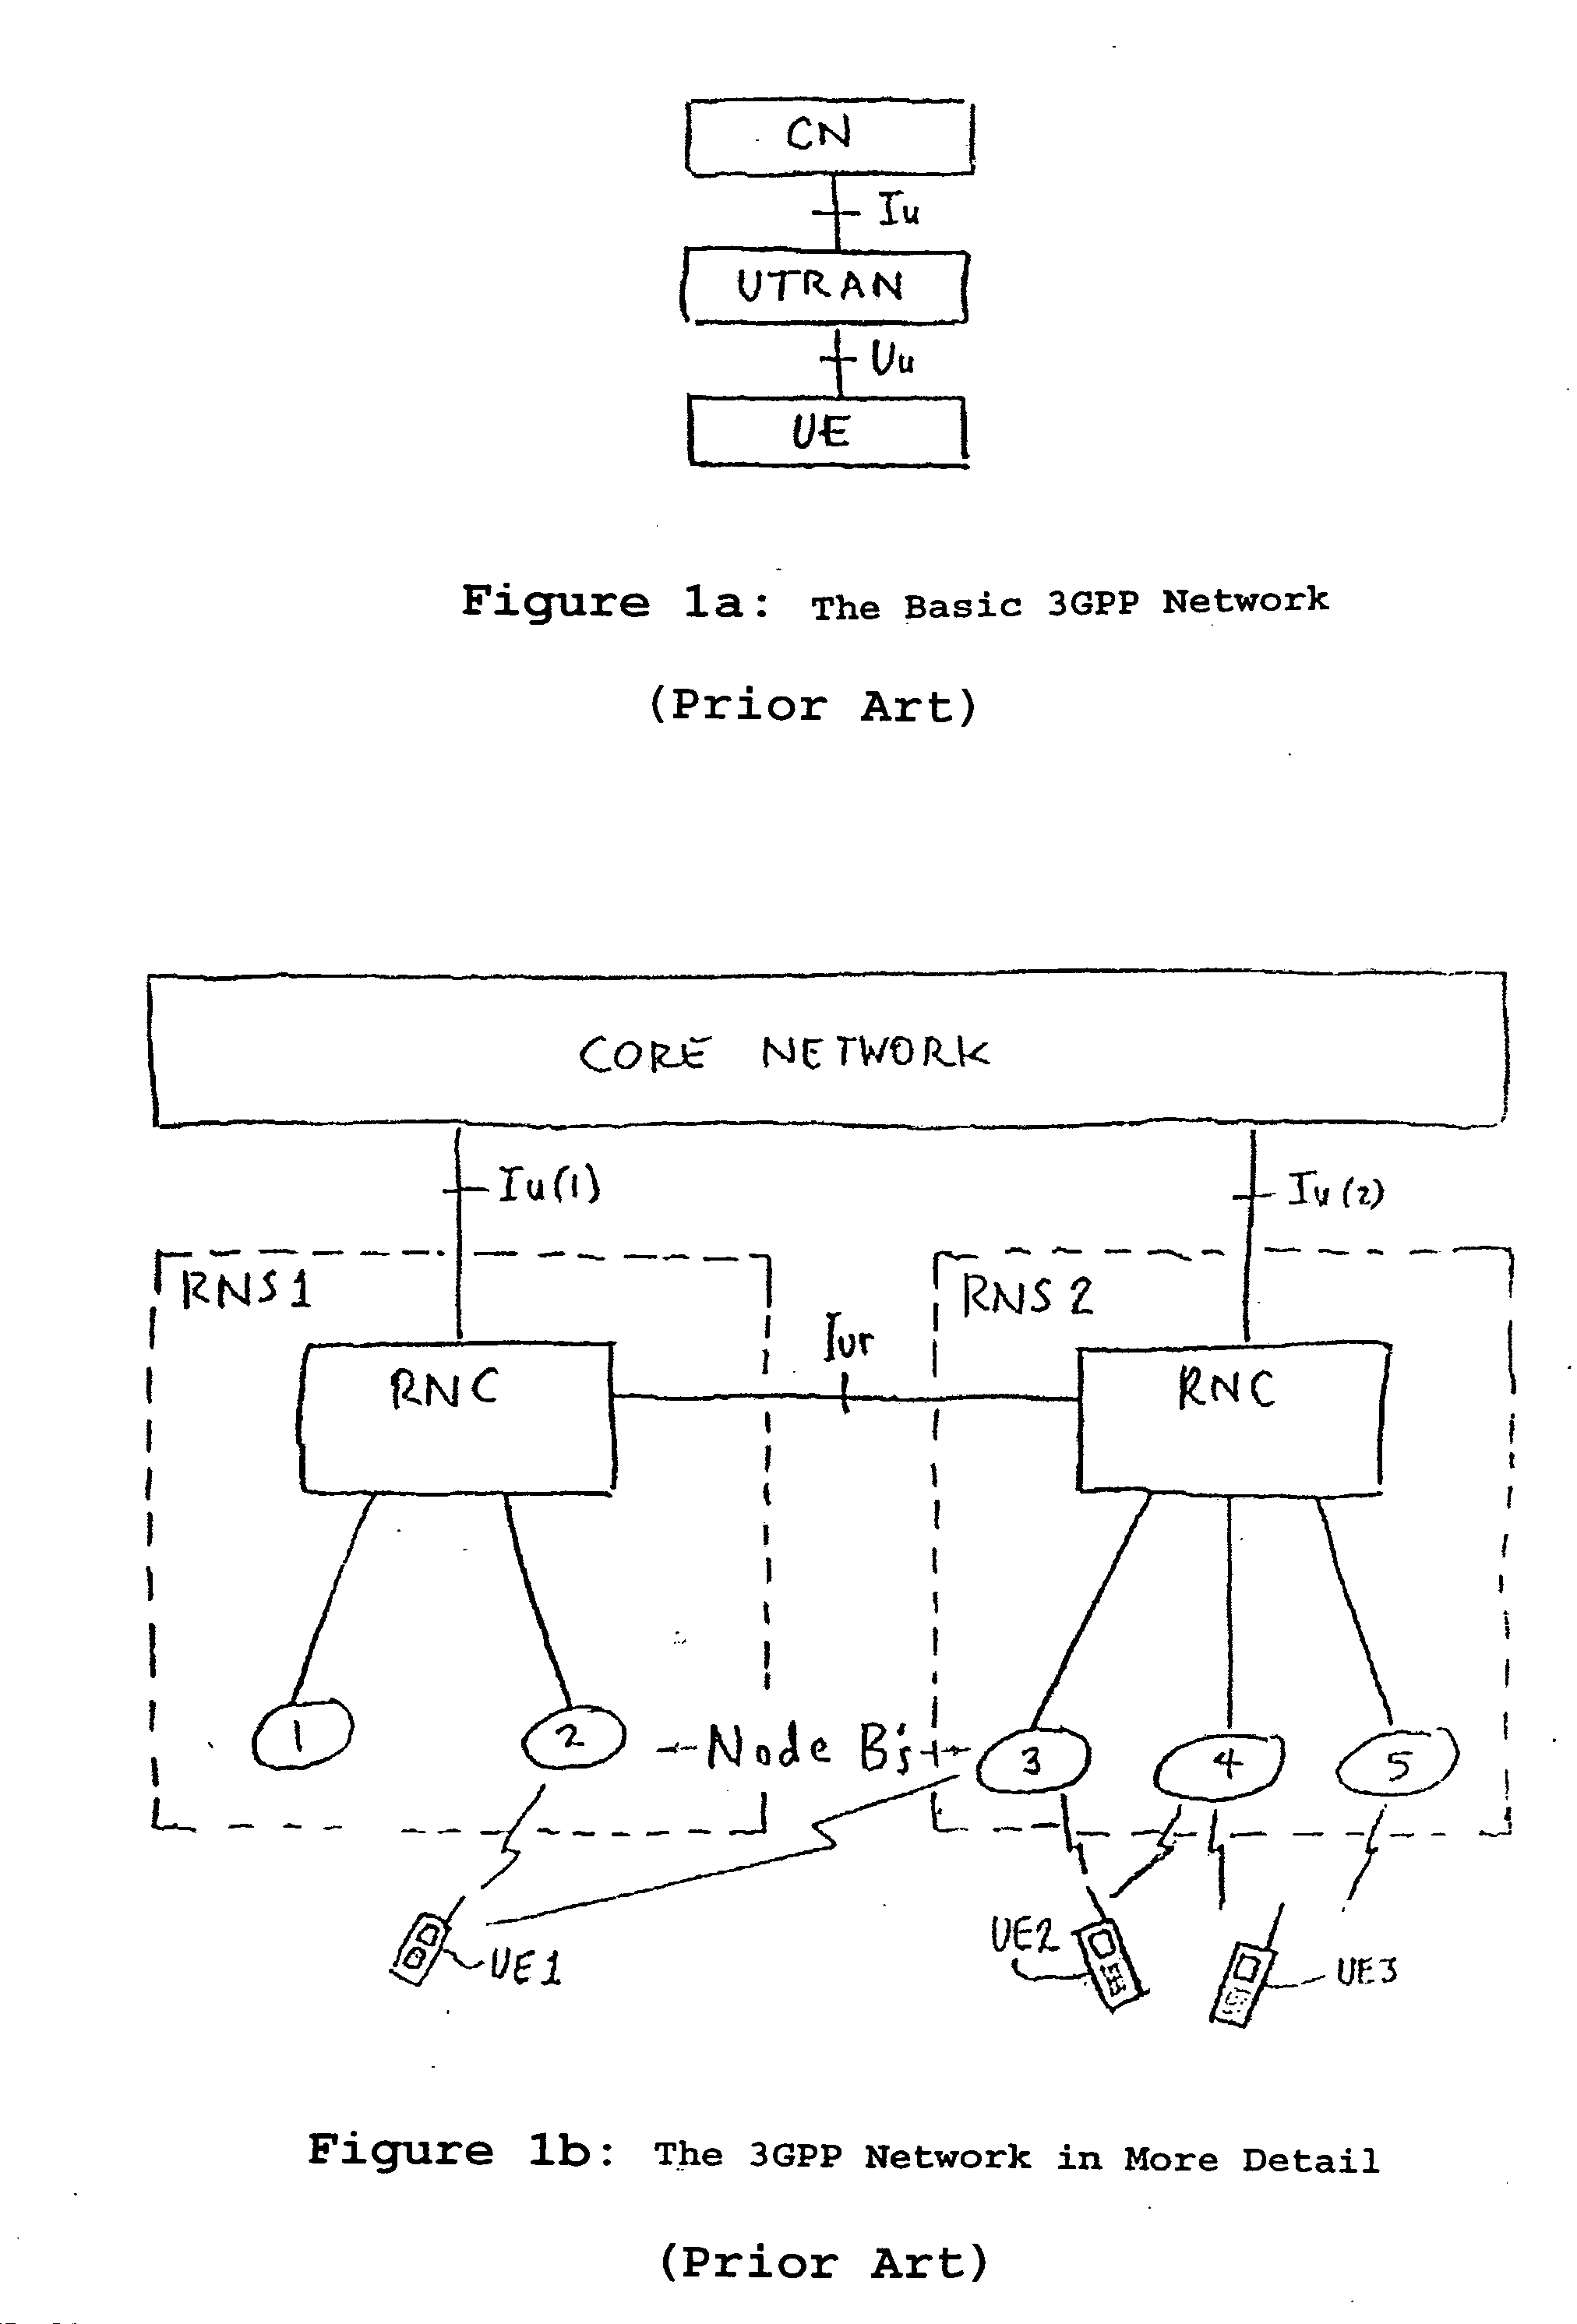 Recovery method for lost signaling connection with HSDPA/fractional DPCH